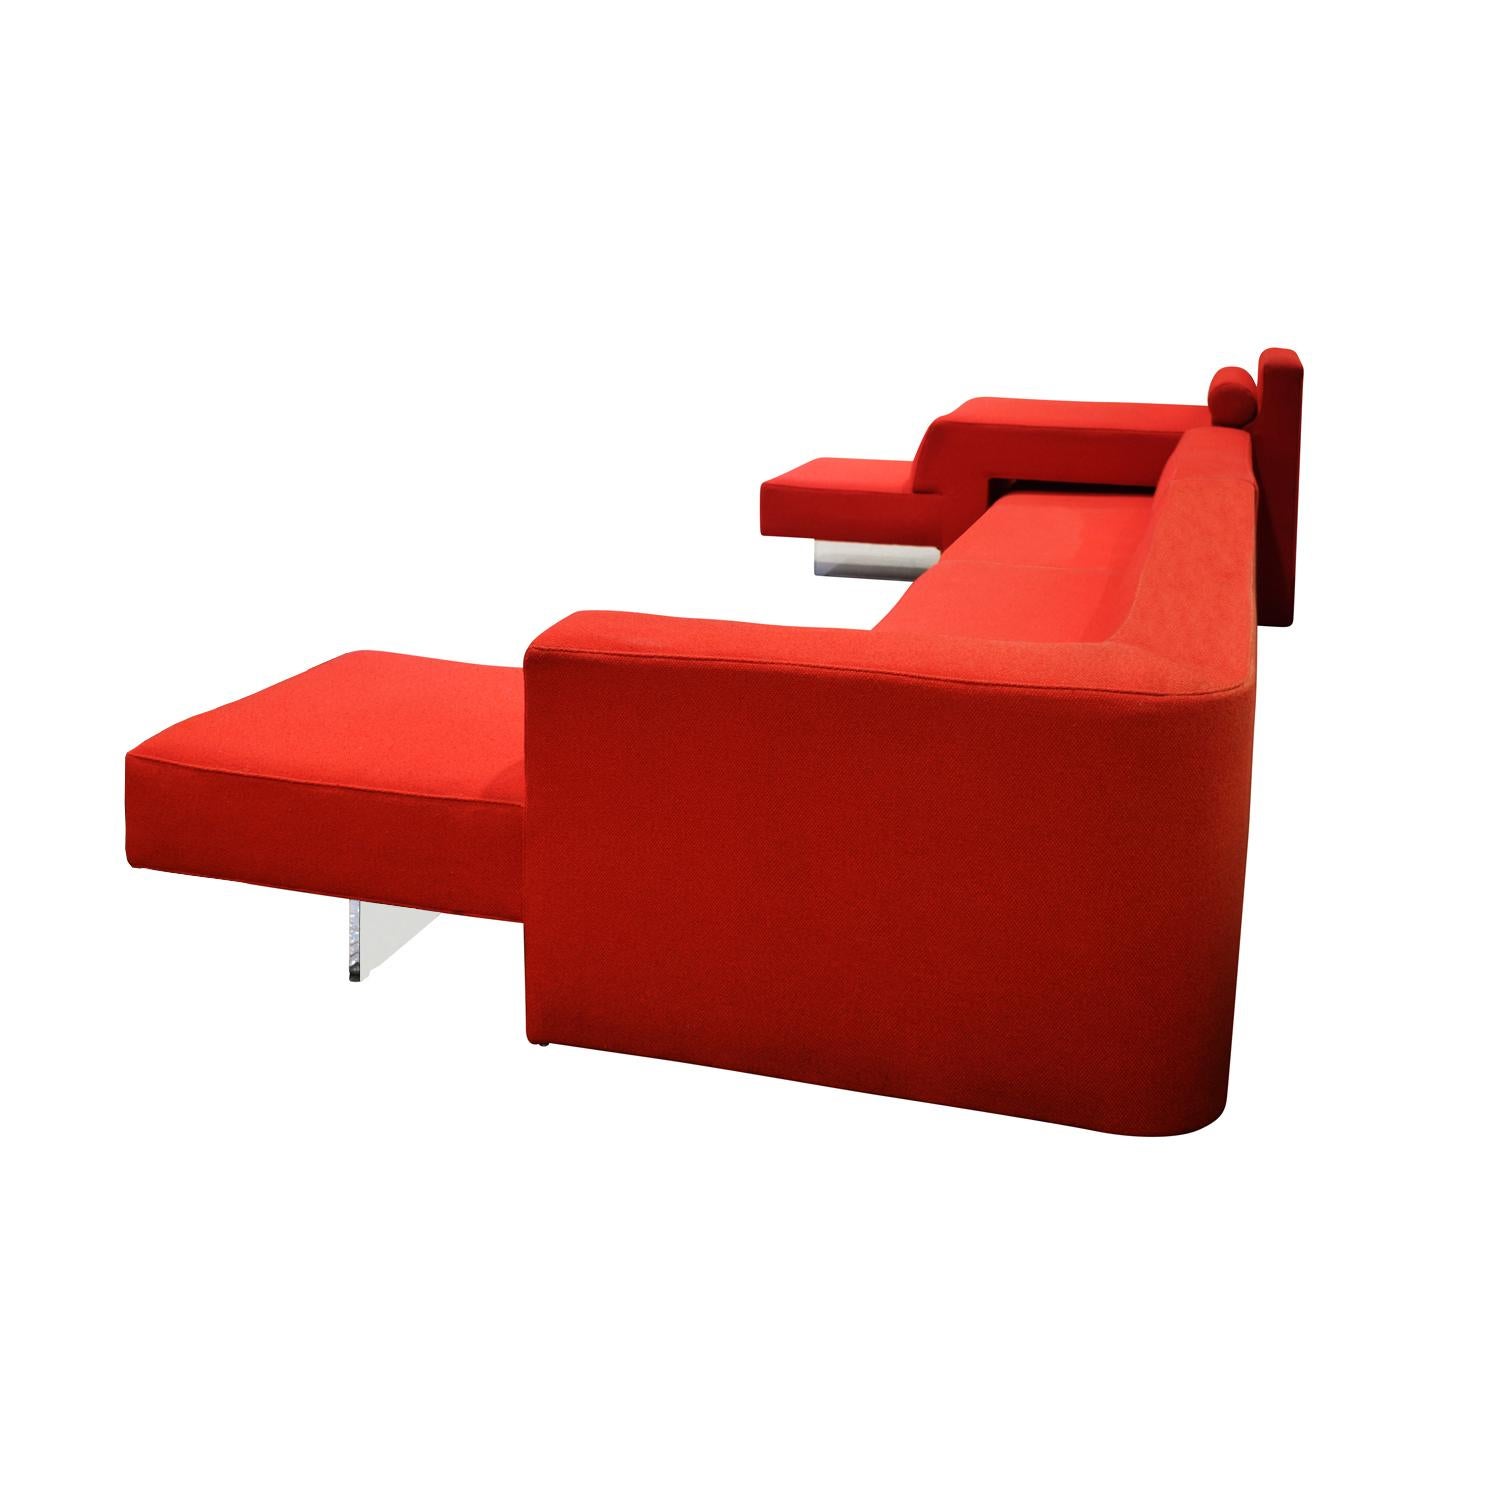 Large sectional sofa, upholstered with lucite bases, by Vladimir Kagan, Omnibus Collection, American 1975. This sofa is completely modular with 1 Corner with extension unit, 1 High-Low unit, and 1 Love seat with extension unit which slides under the